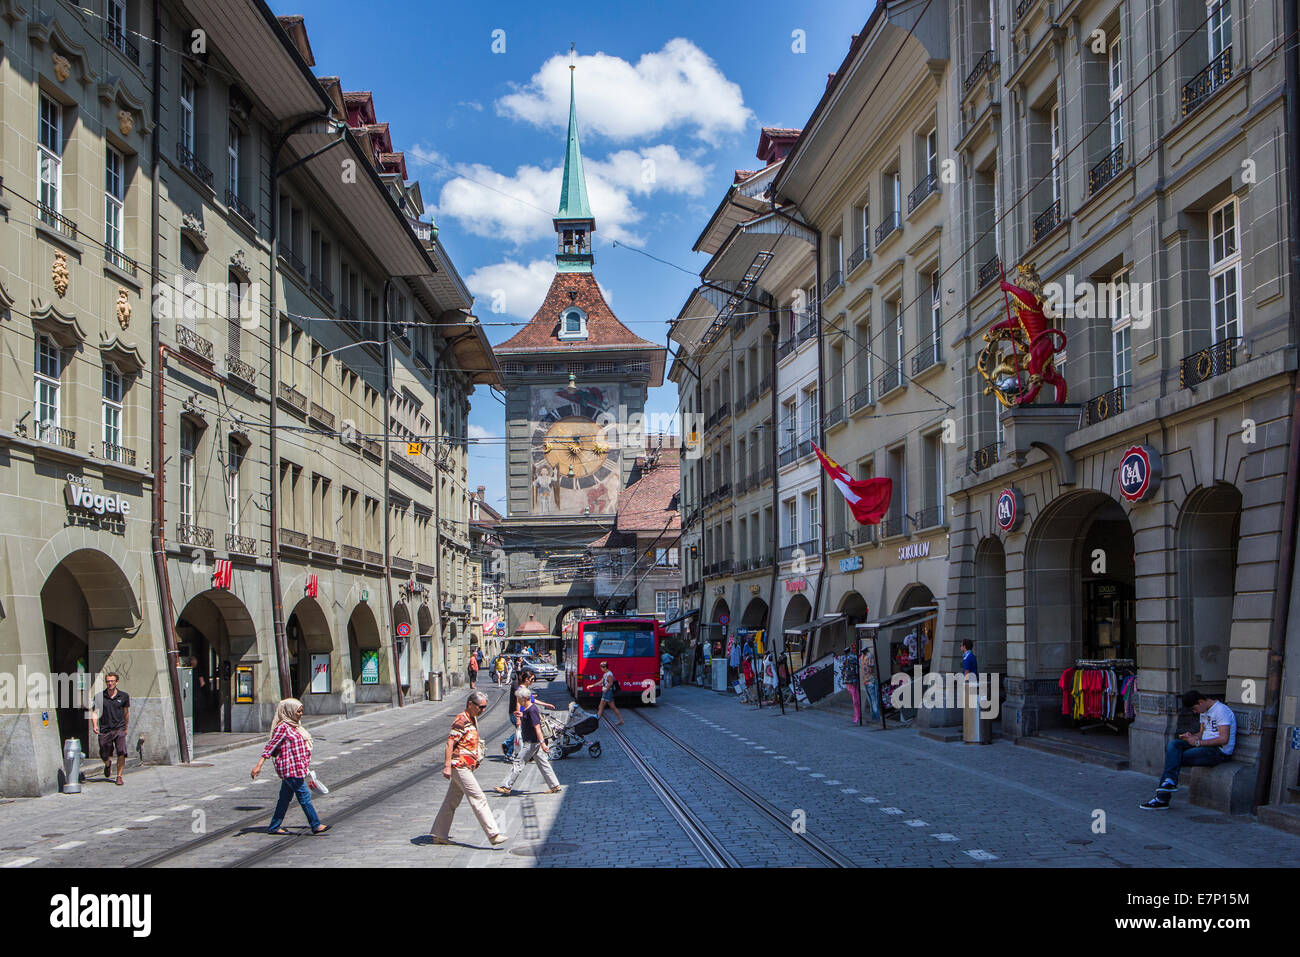 Bern, Berne, Clock, Kramgasse, Switzerland, Europe, architecture, city, downtown, famous, flags, old town, roofs, skyline, stree Stock Photo